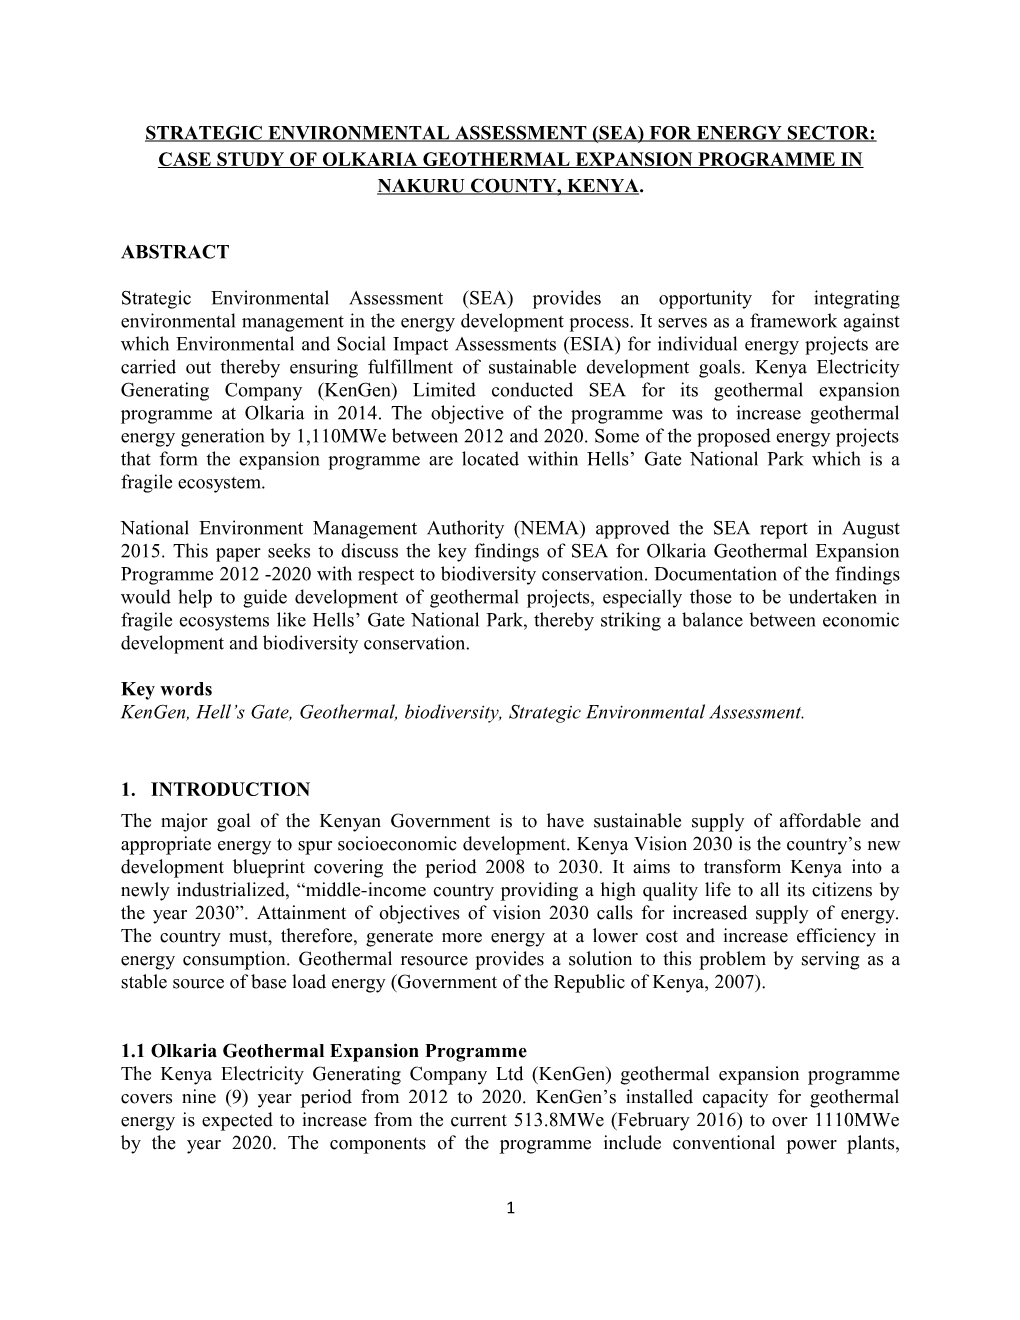 Strategic Environmental Assessment (Sea) for Energy Sector: Case Study of Olkaria Geothermal